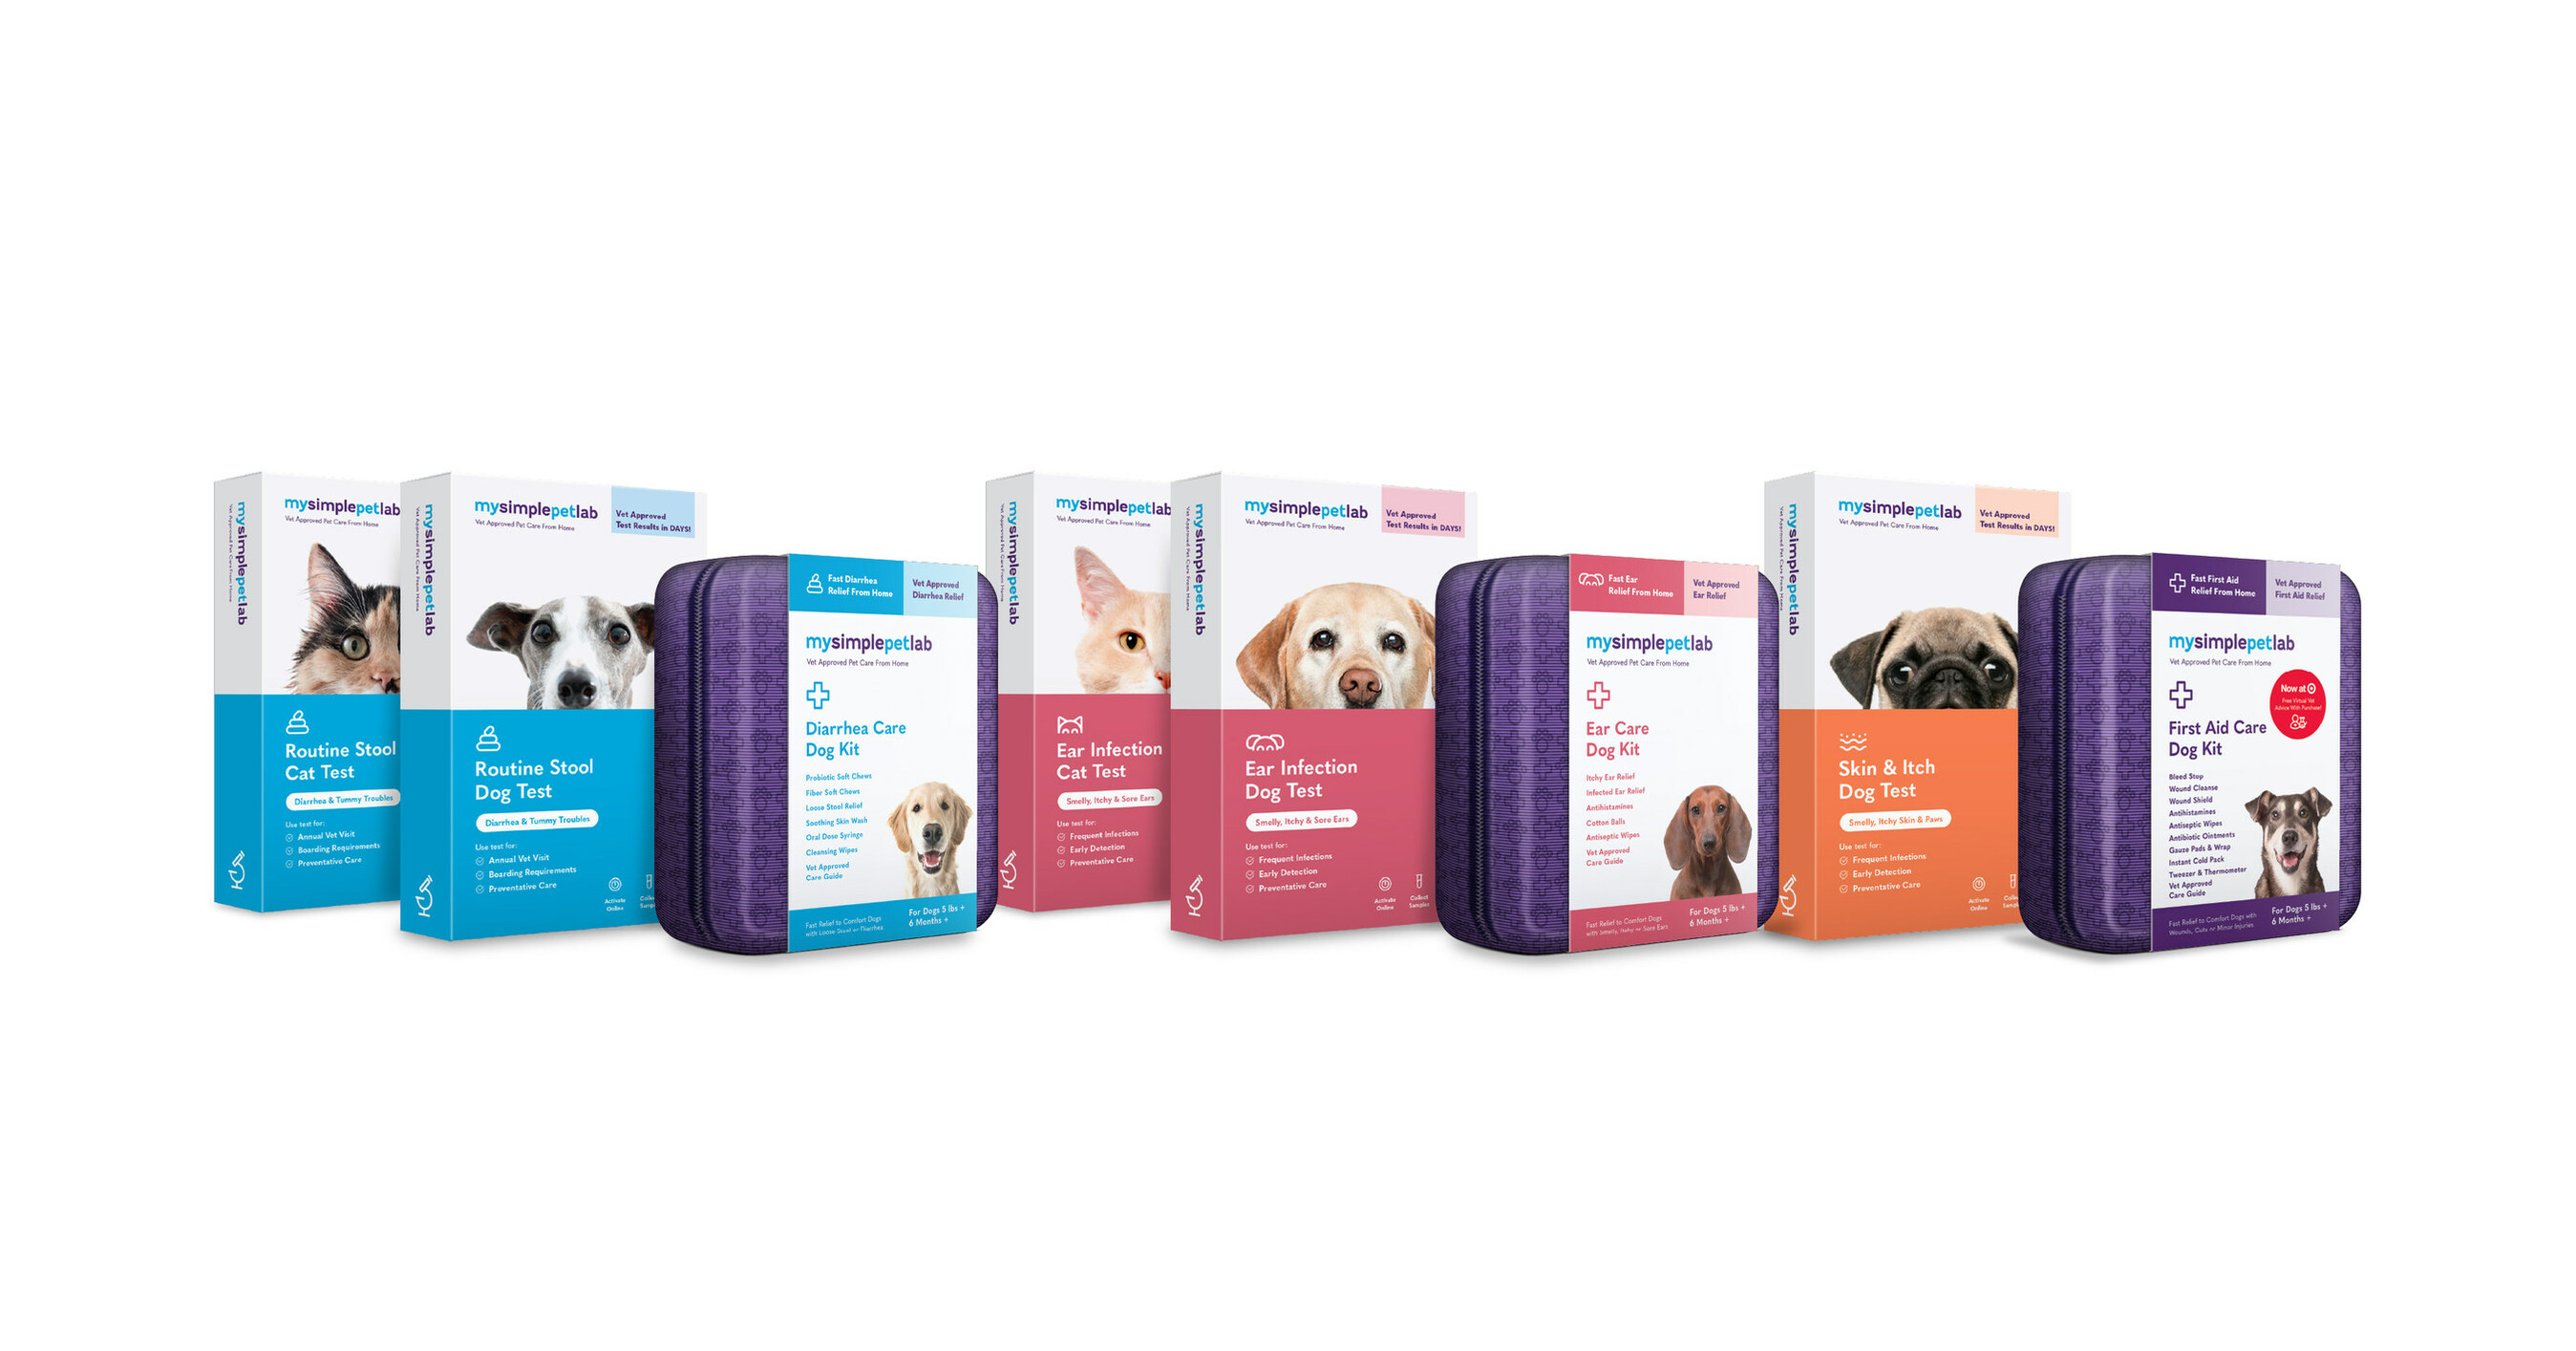 MySimplePetLab’s First Aid Care Dog Kit is Now Available in Target Stores Nationwide and Offering Free Virtual Veterinary Advice with Purchase